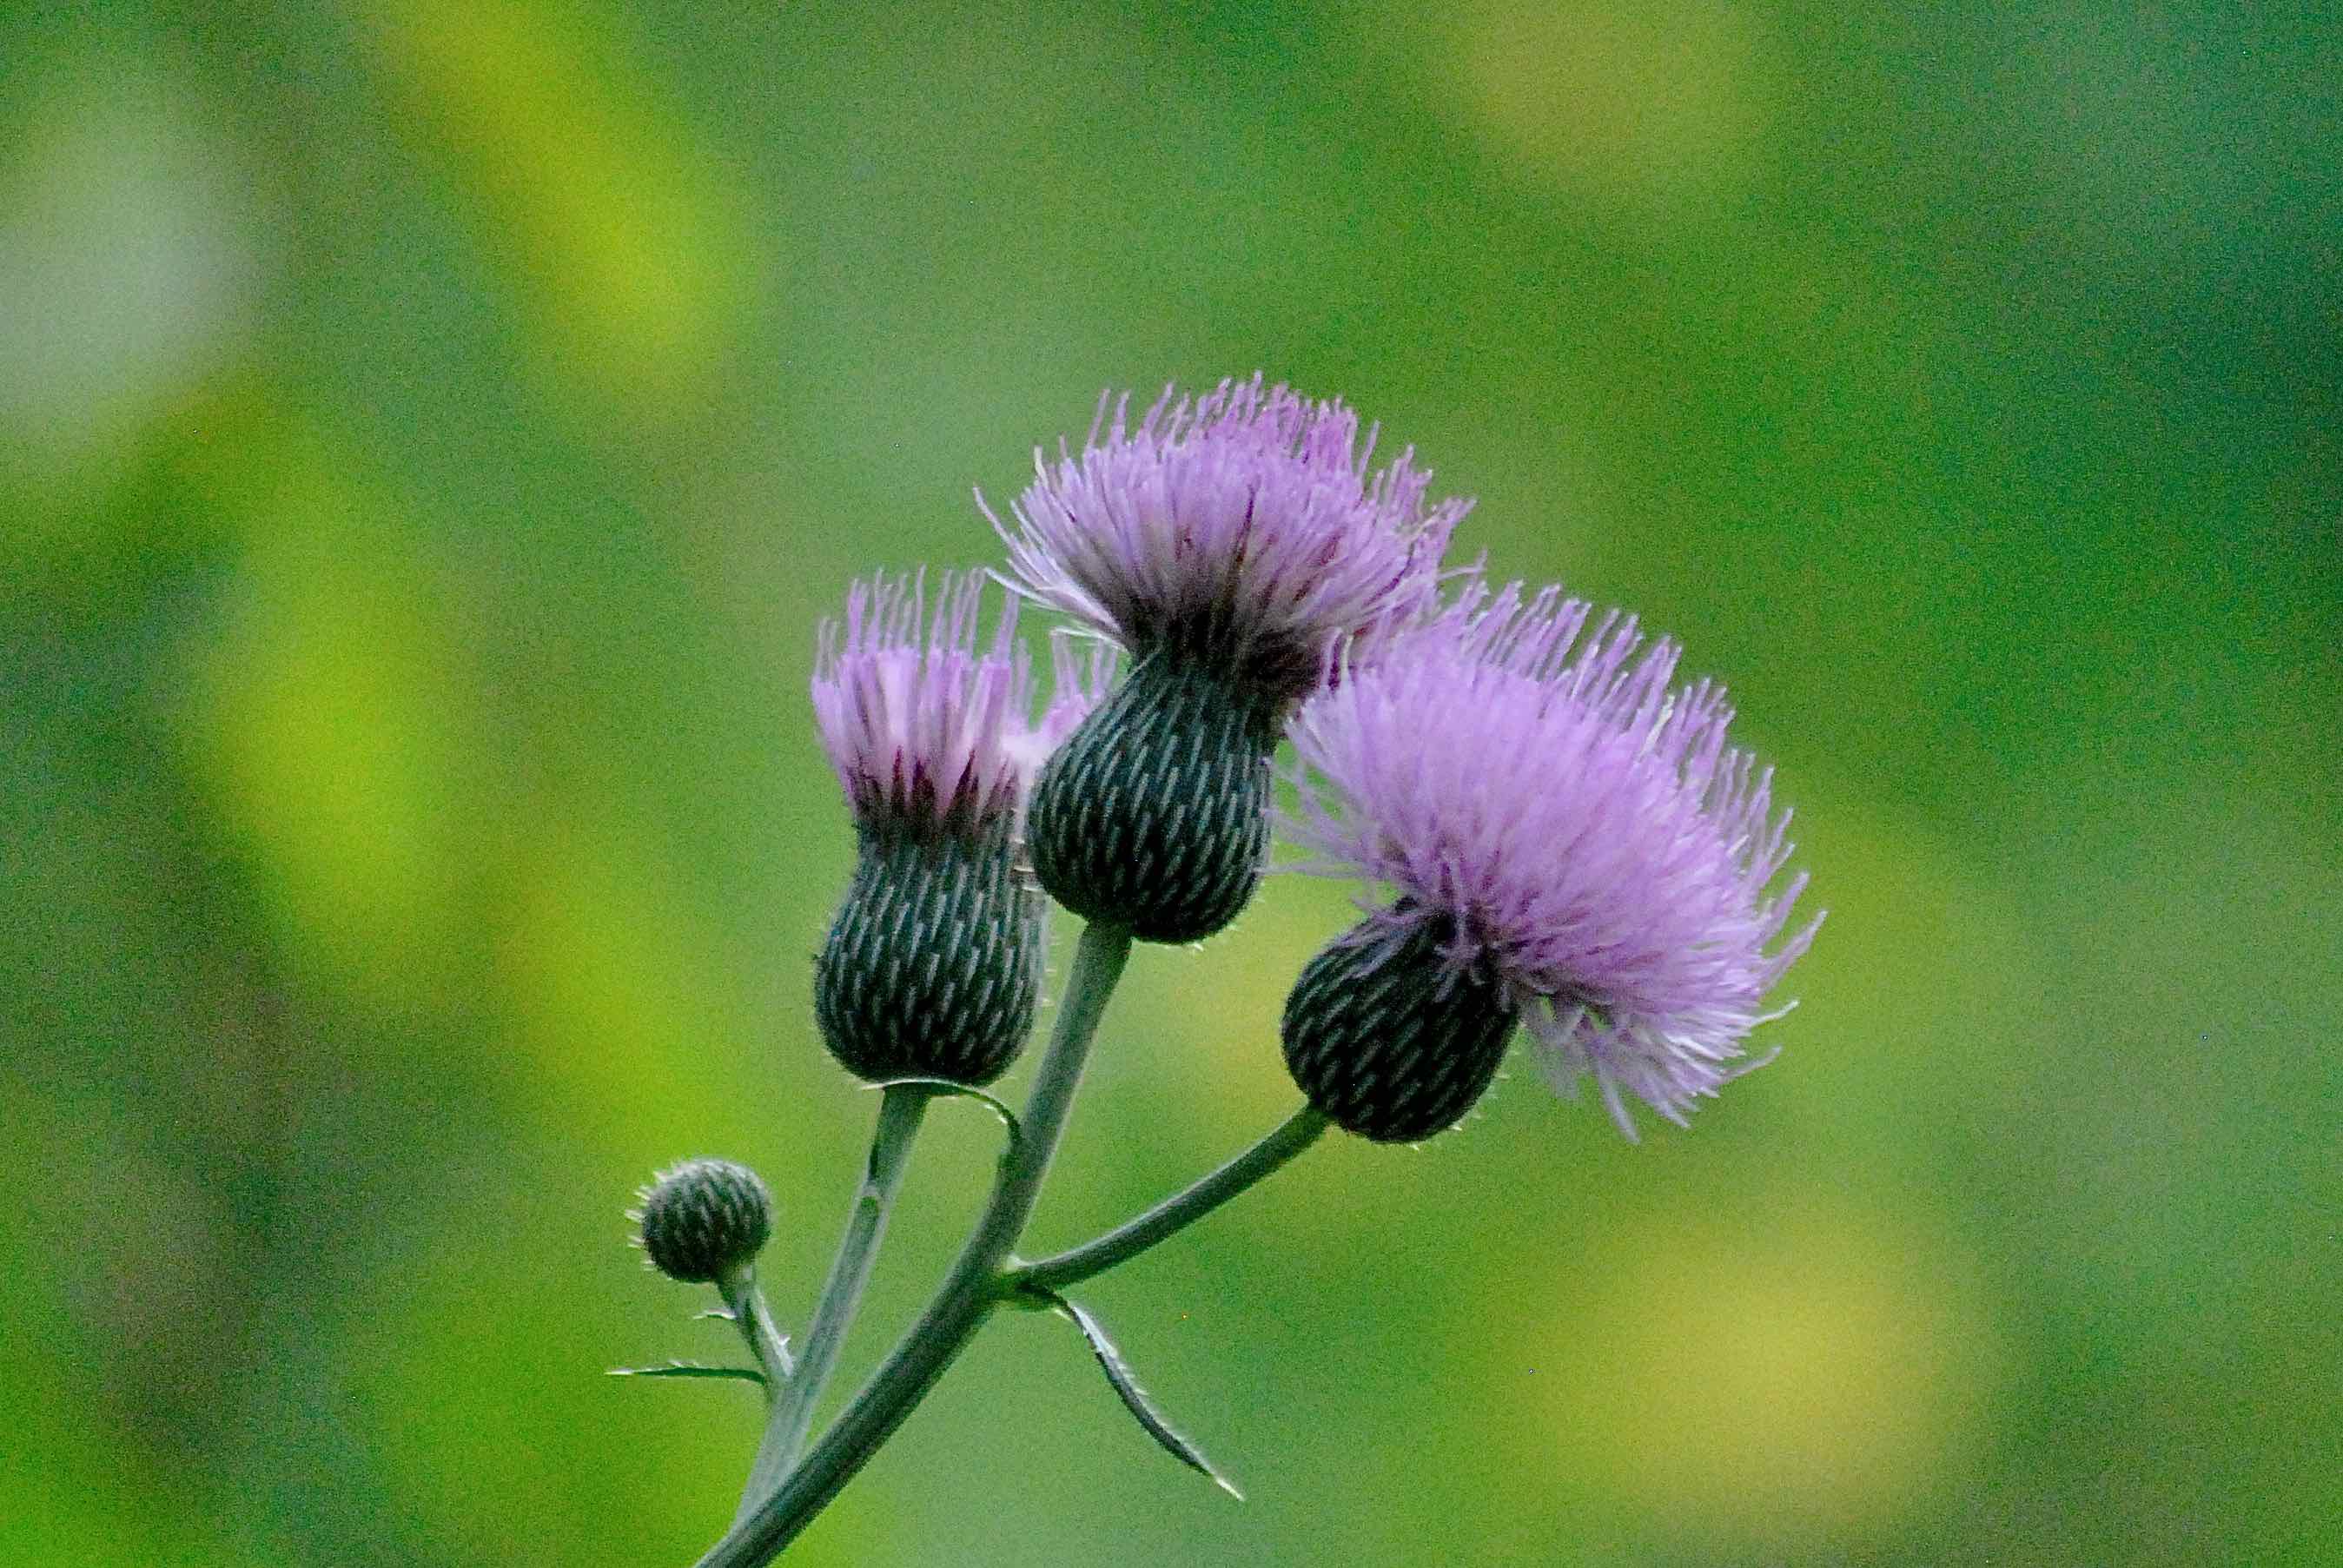 Nuttall's Thistle